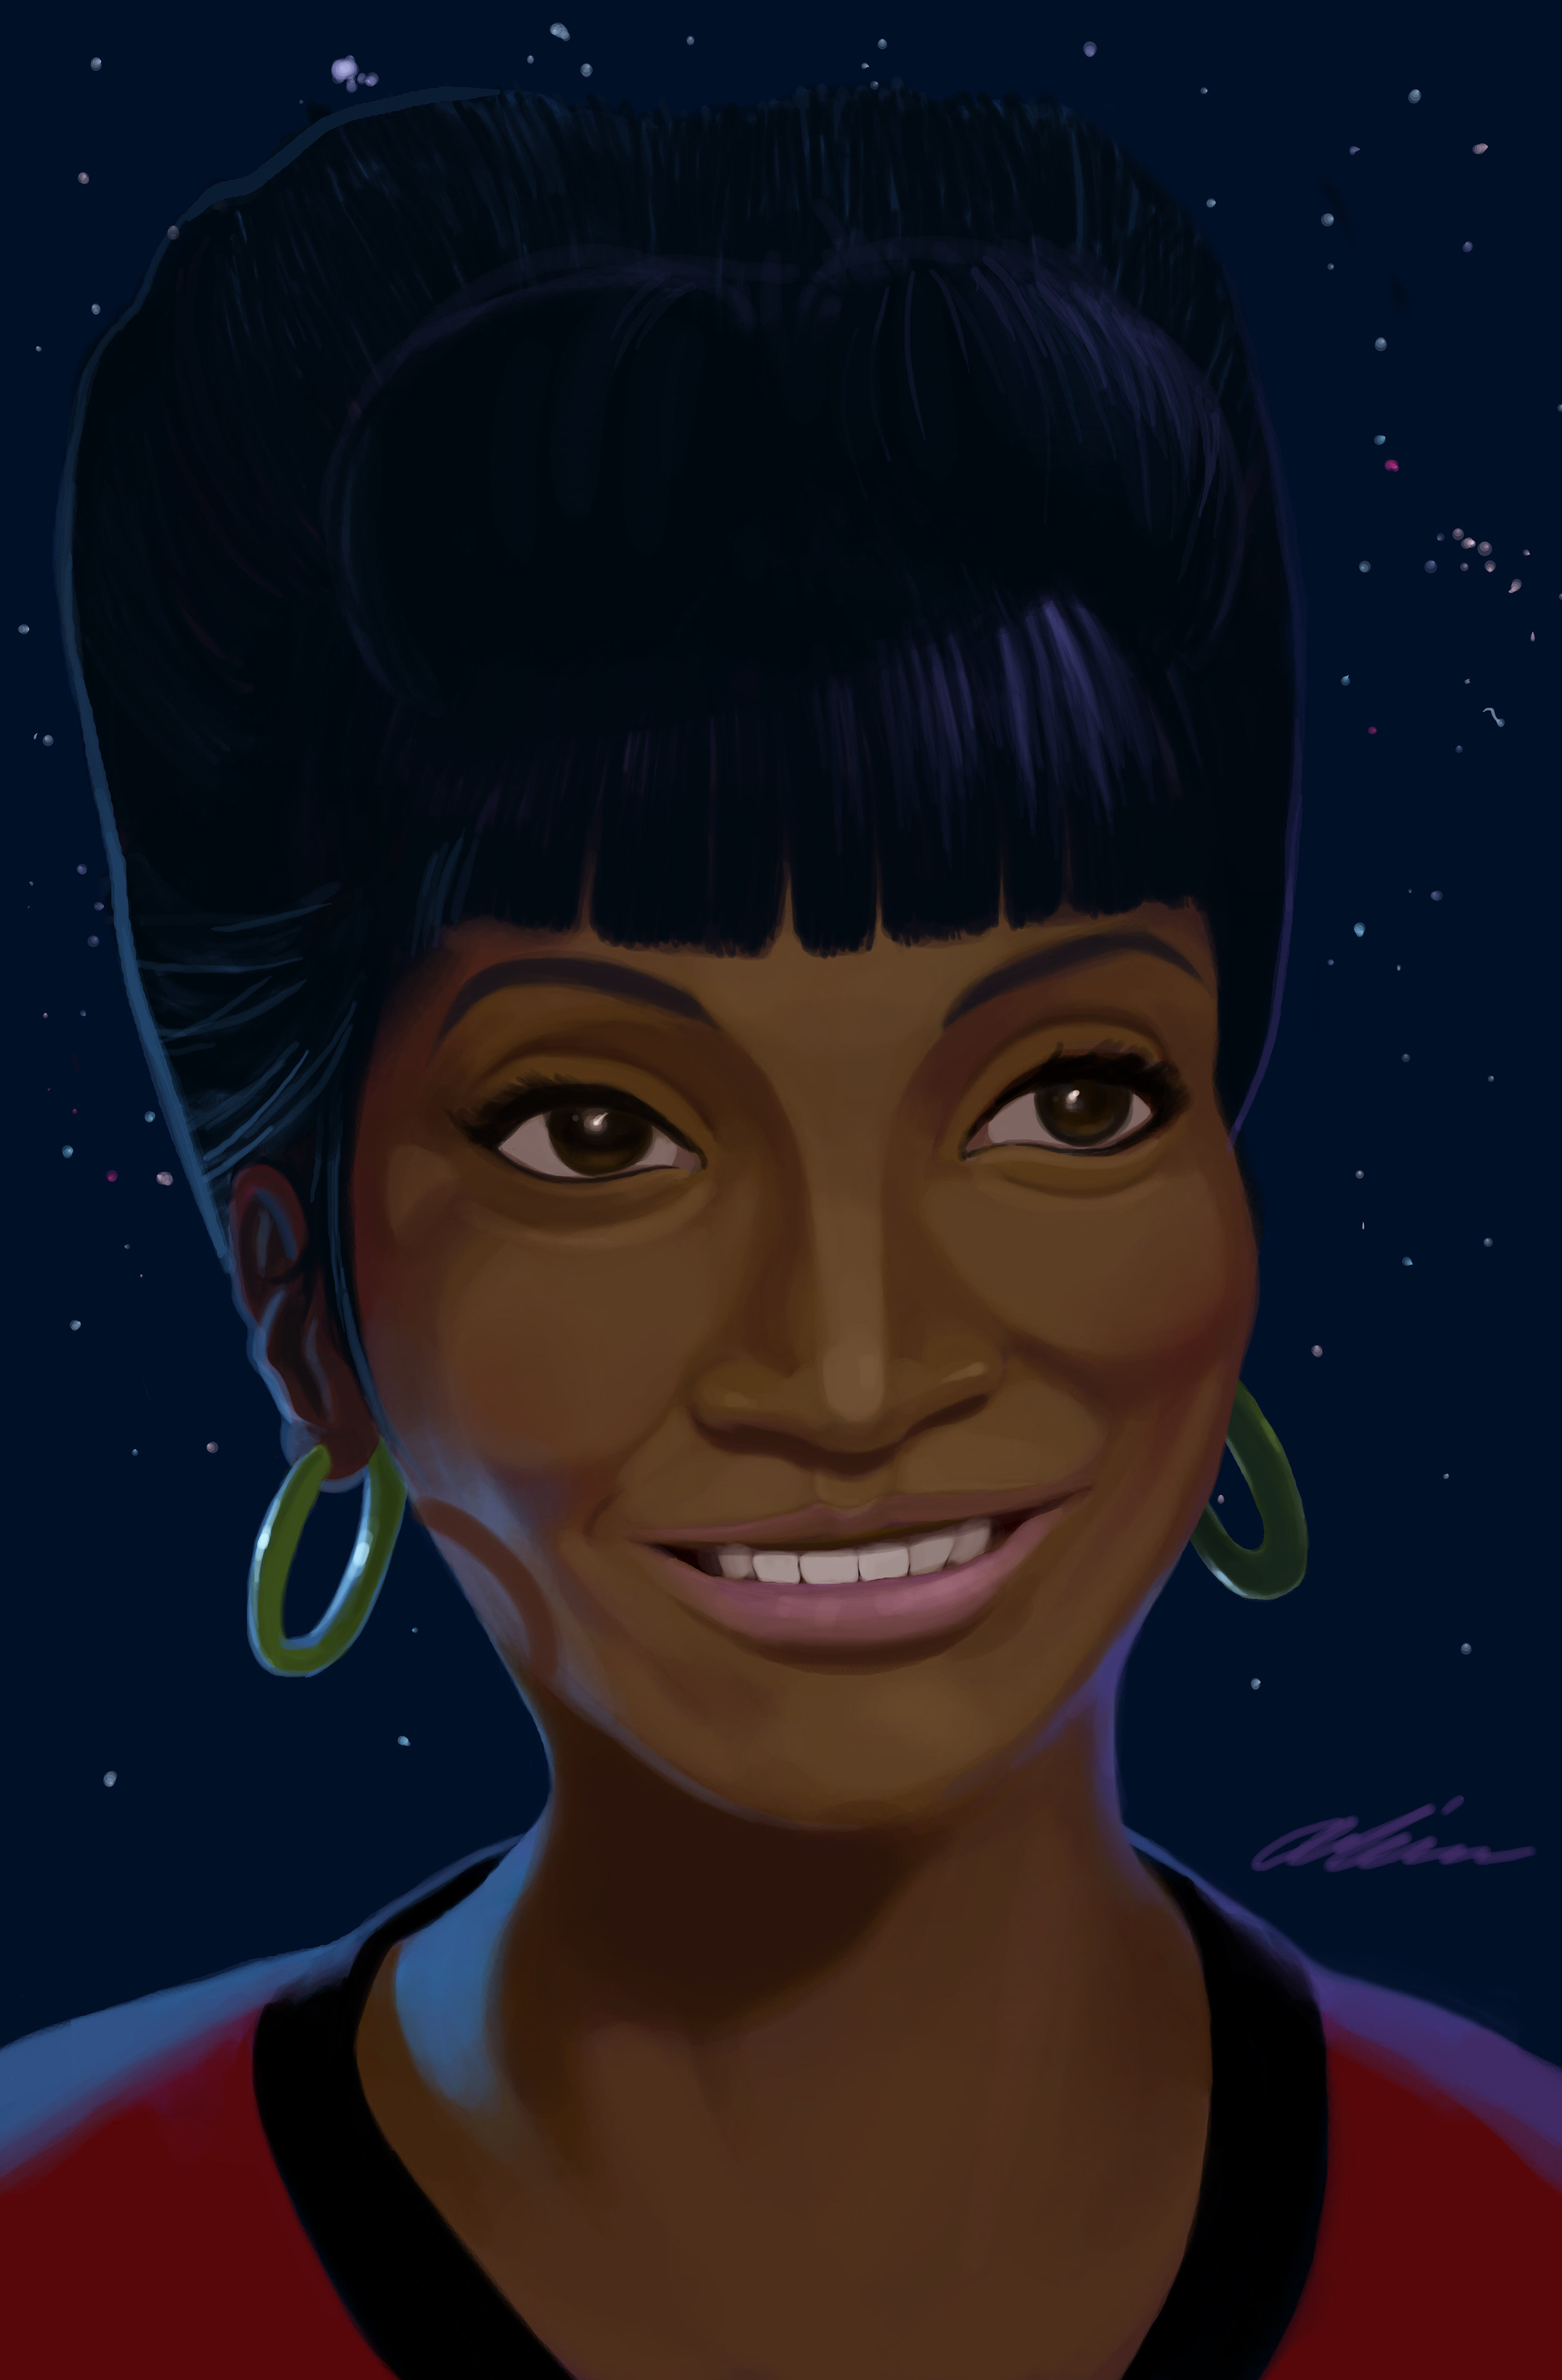    Click to purchase a print of this painting for $10.00 in our Store:  https://www.inazumastudios.com/shop/uhura-print   Star Trek © Paramount Pictures   